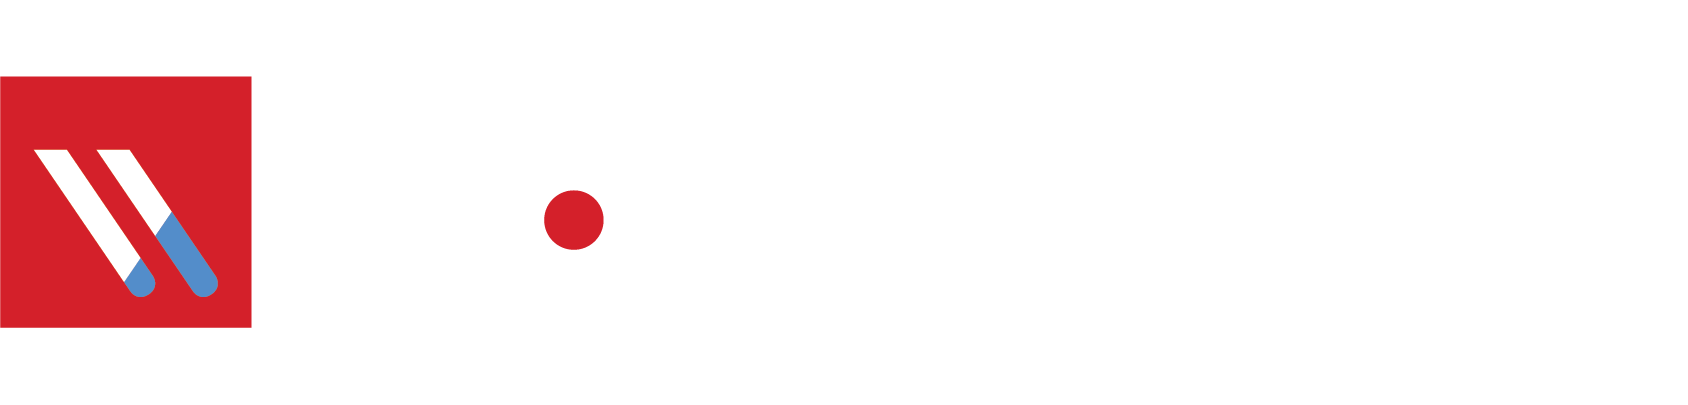 connect! logo updated